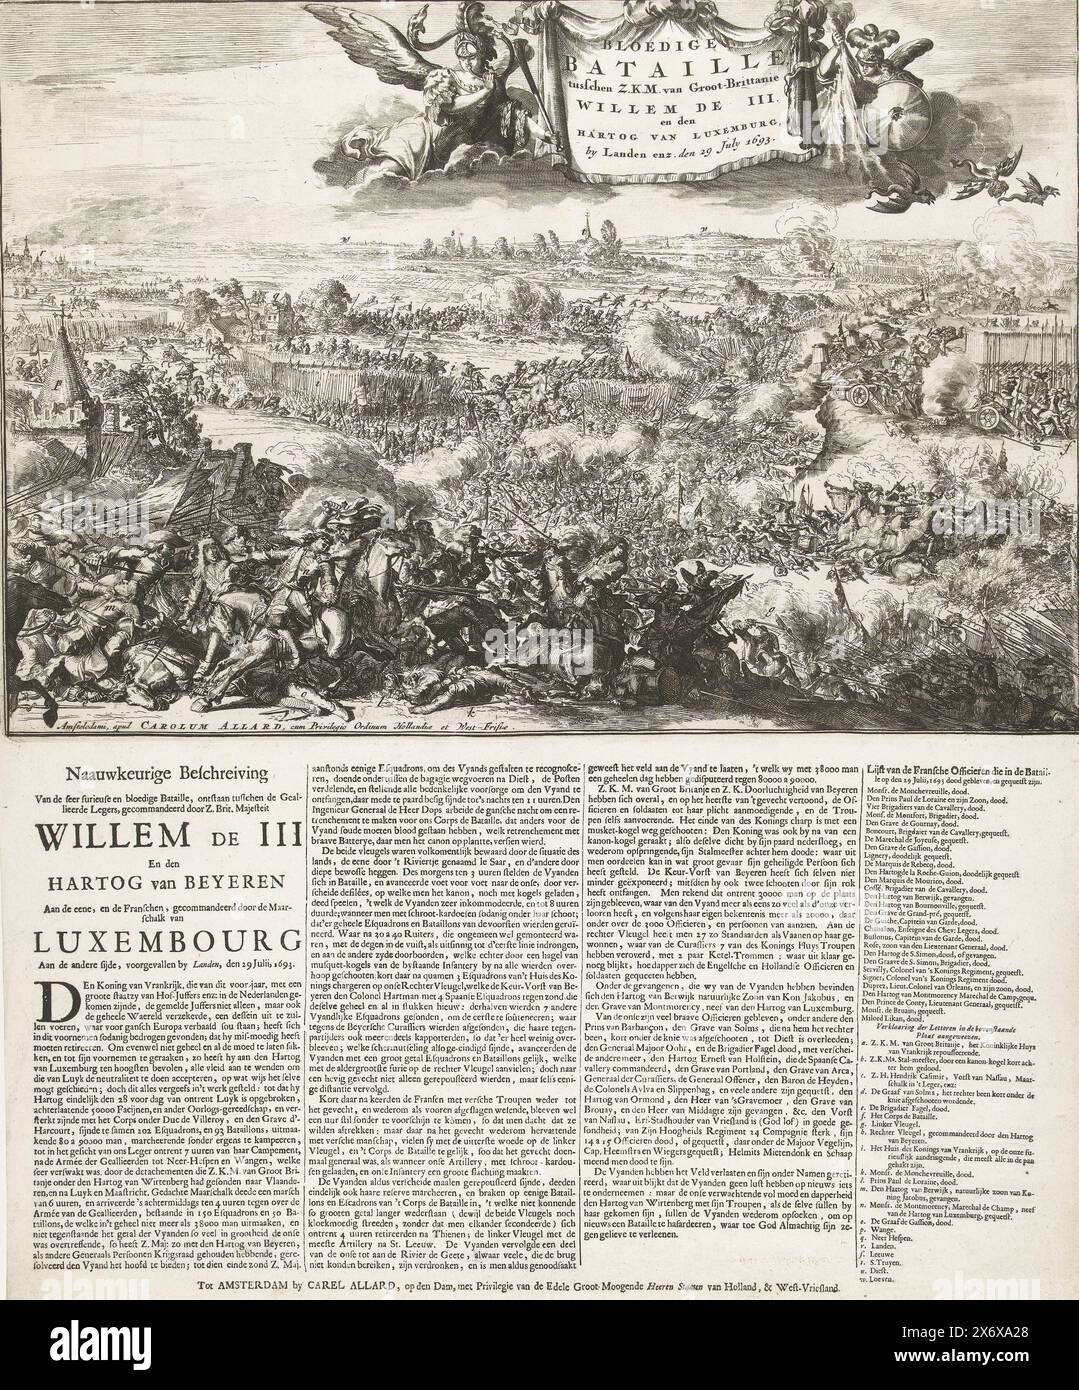 Battle of Landen, 1693, Bloody Battle between H.K.M. of Great Britain William the III. and the heart of Luxembourg, by Landen etc. on 29 July 1693 (title on object), Battle of Landen (Neerwinden) between the Allies under King William III and the French under the Duke of Luxembourg, 29 July 1693. View of the battle, in the air the cartouche with title flanked by two allegorical figures. Below the plate on the sheet the description in 4 columns., print, print maker: anonymous, print maker: Romeyn de Hooghe, publisher: Carel Allard, (mentioned on object), print maker: Northern Netherlands, print Stock Photo